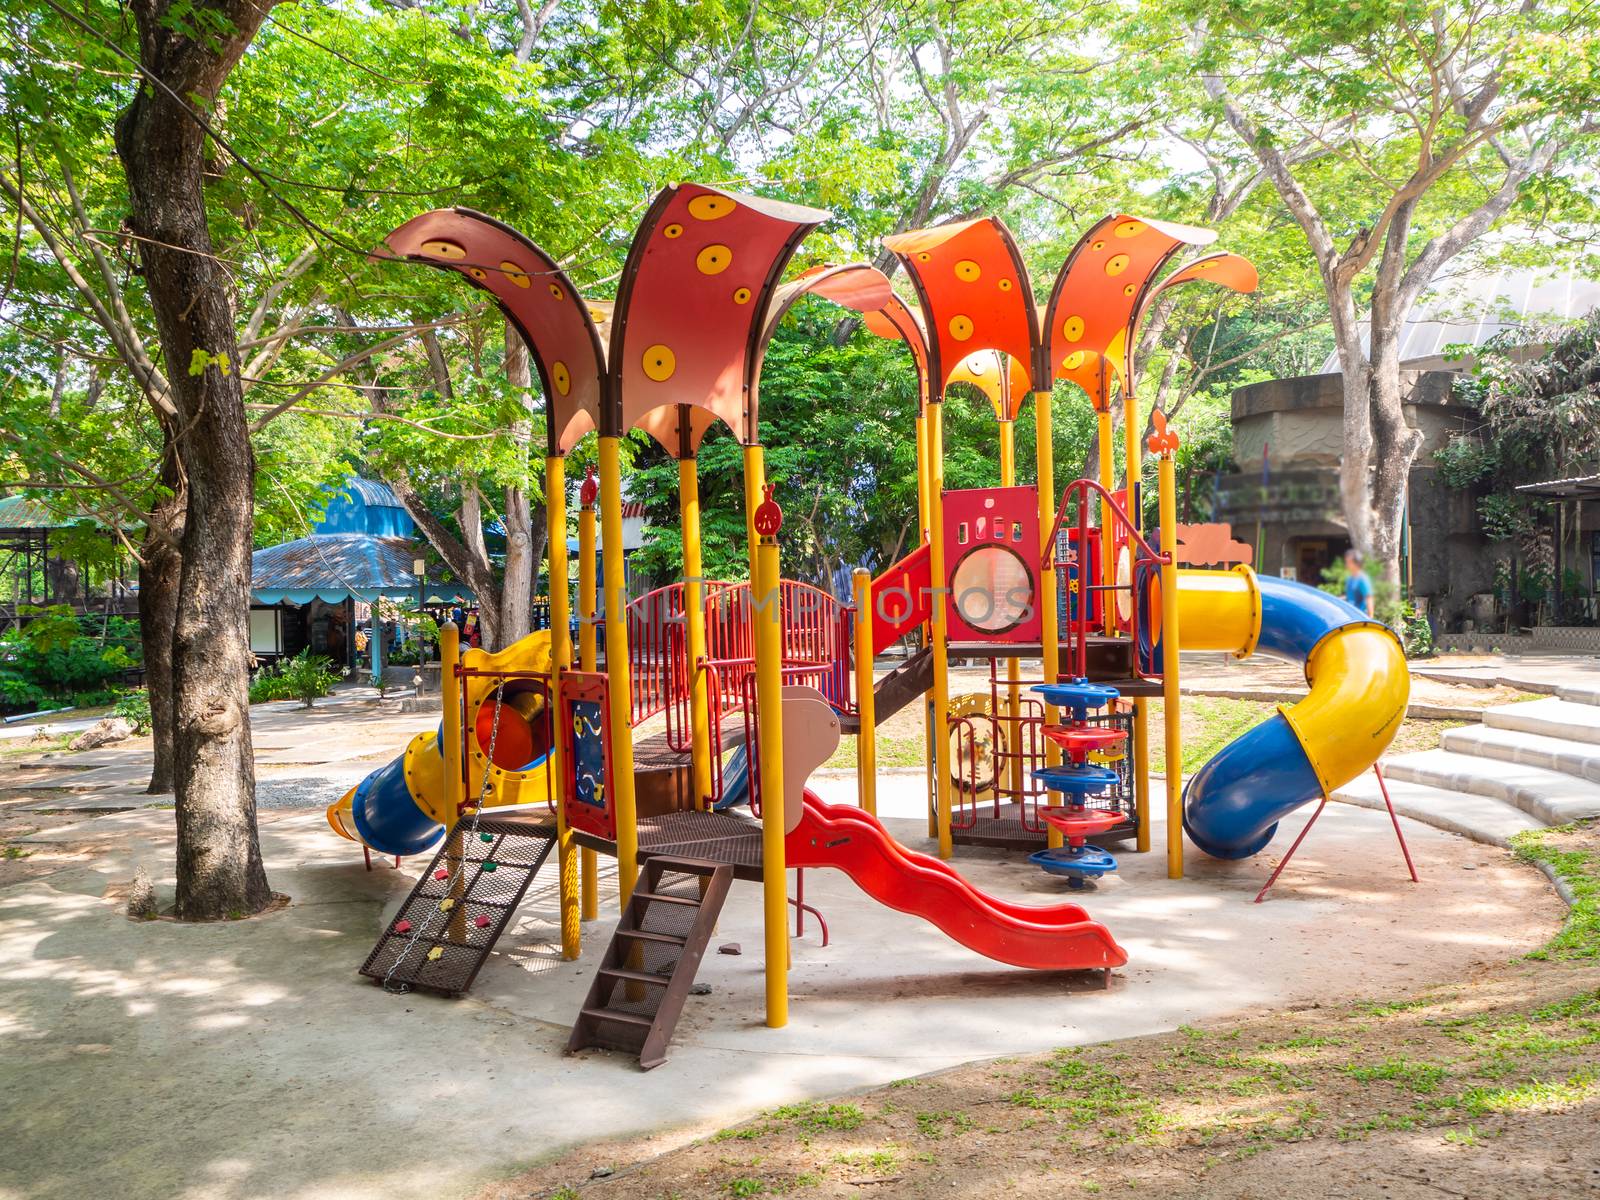 Colorful playground on yard in the park. by shutterbird